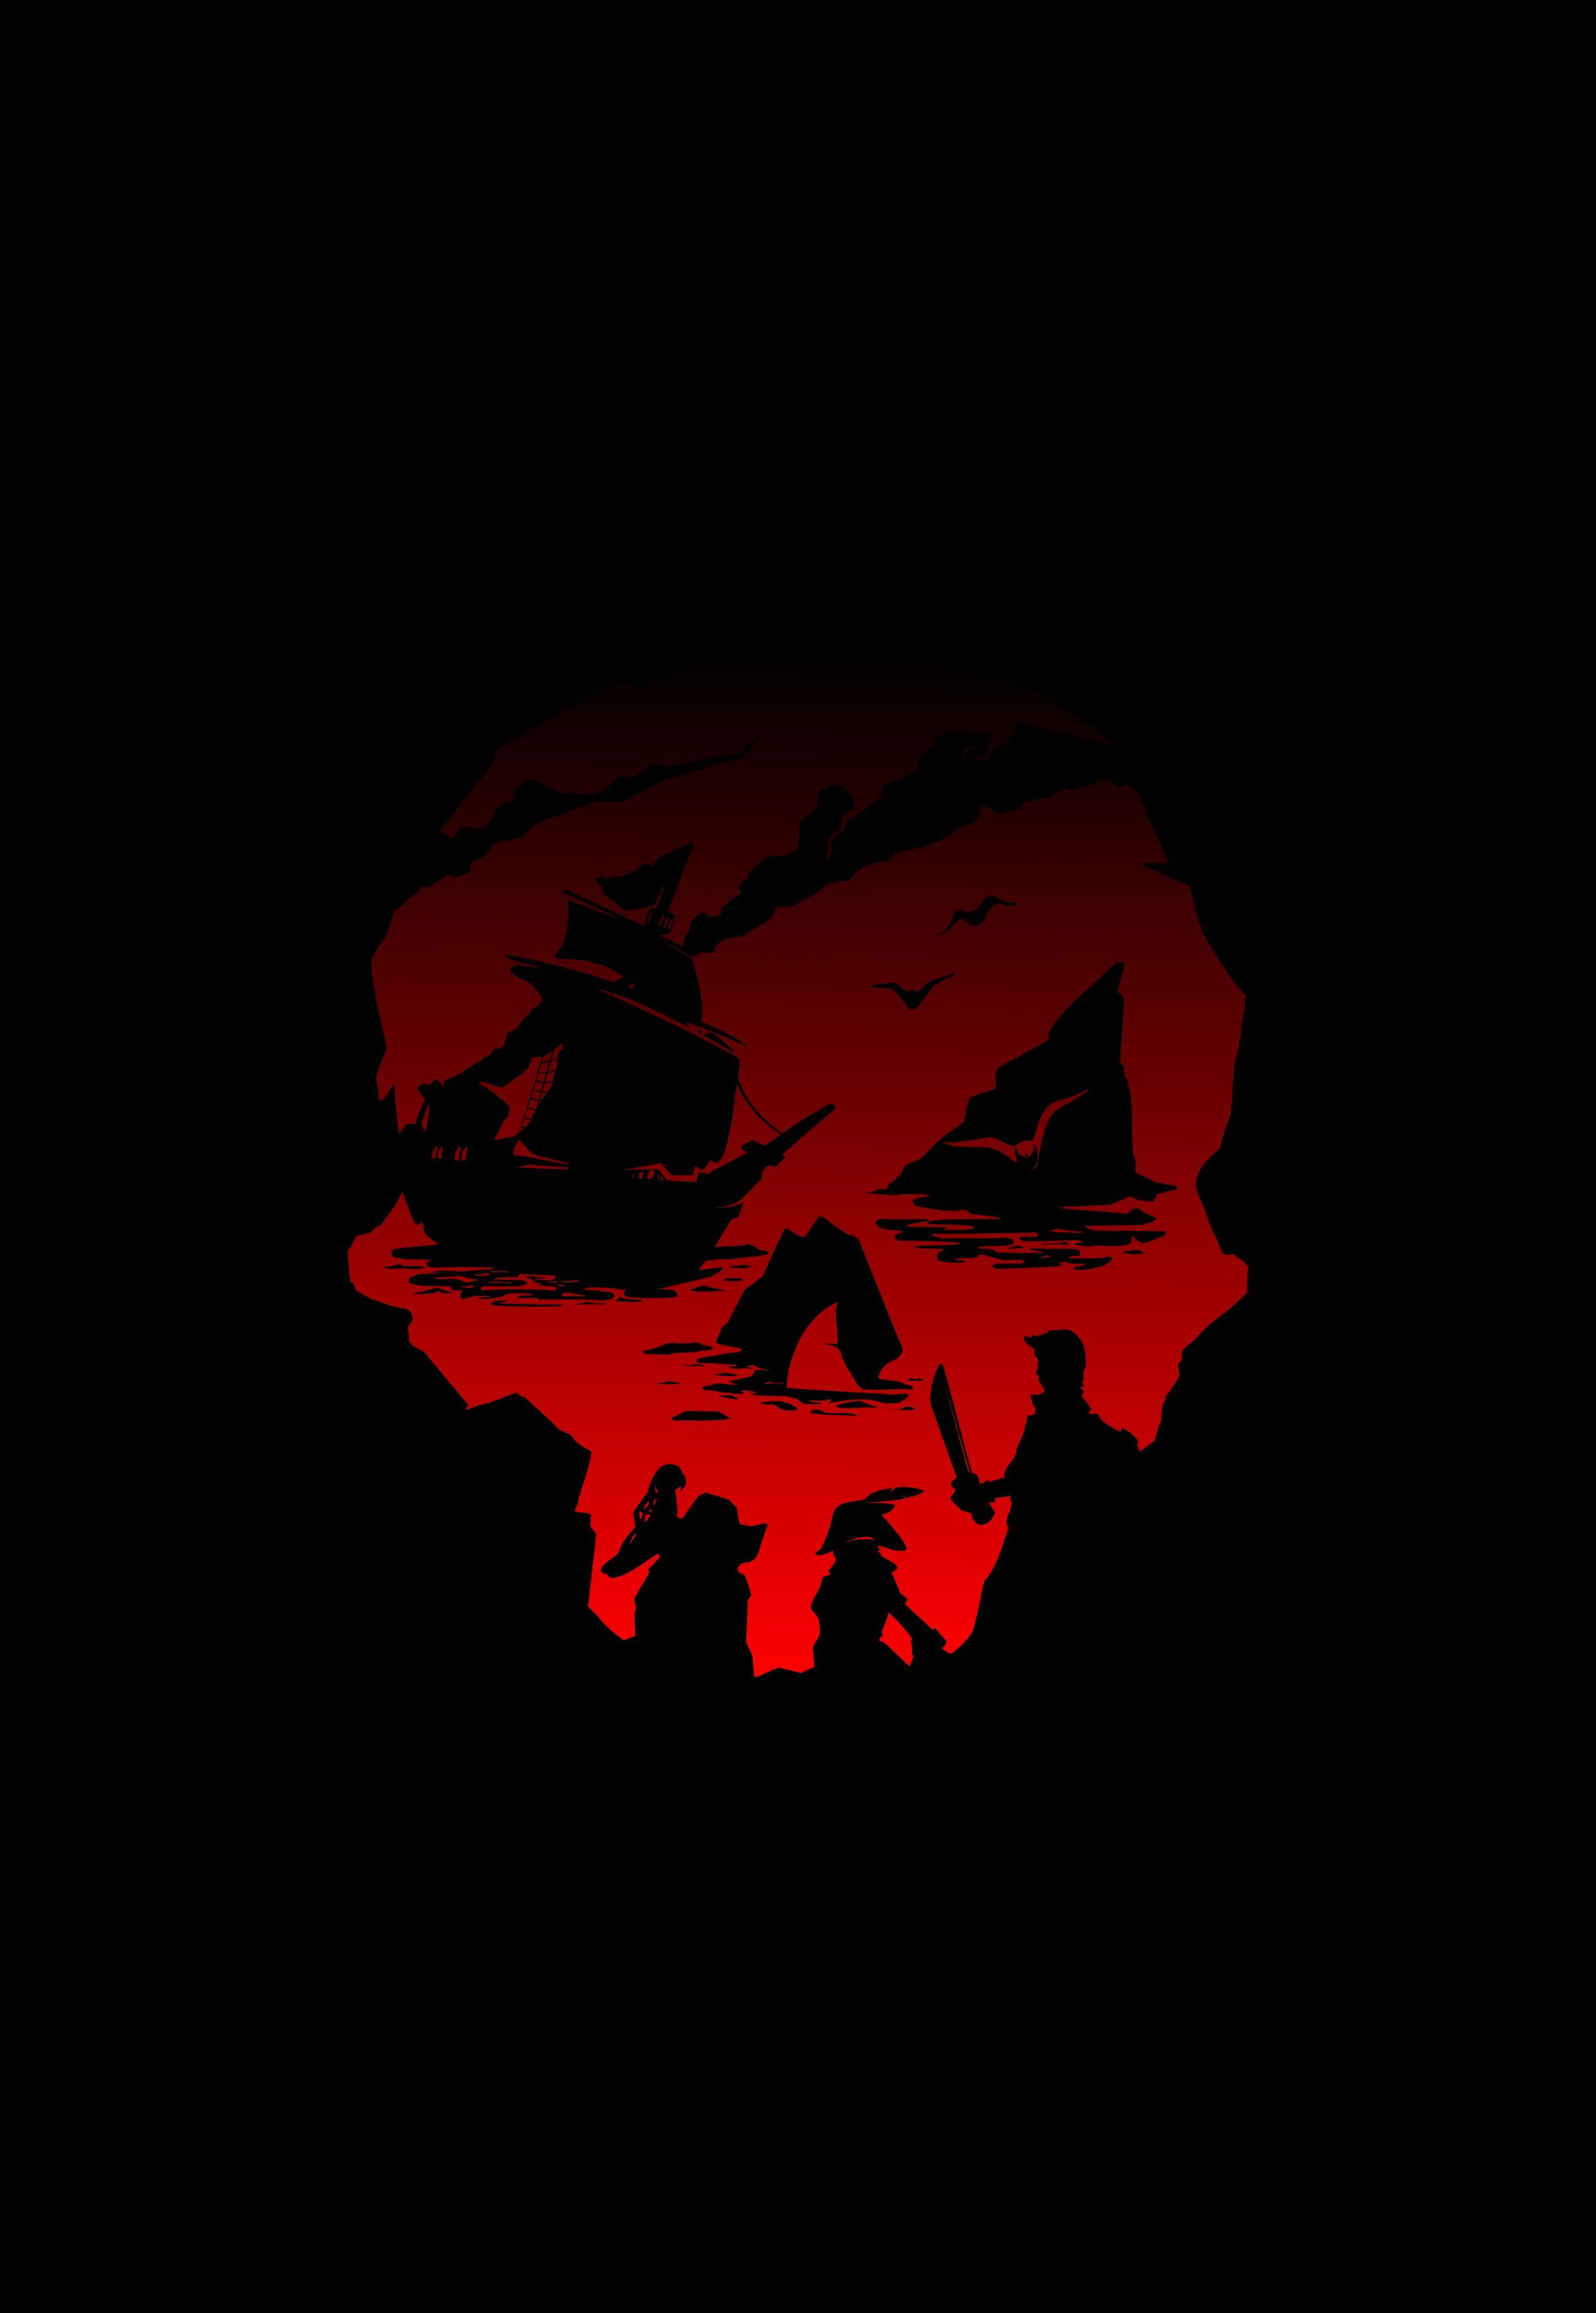 Sea of thieves black background k wallpaper hdwallpaper desktop sea of thieves sea of thieves game gamg wallpapers